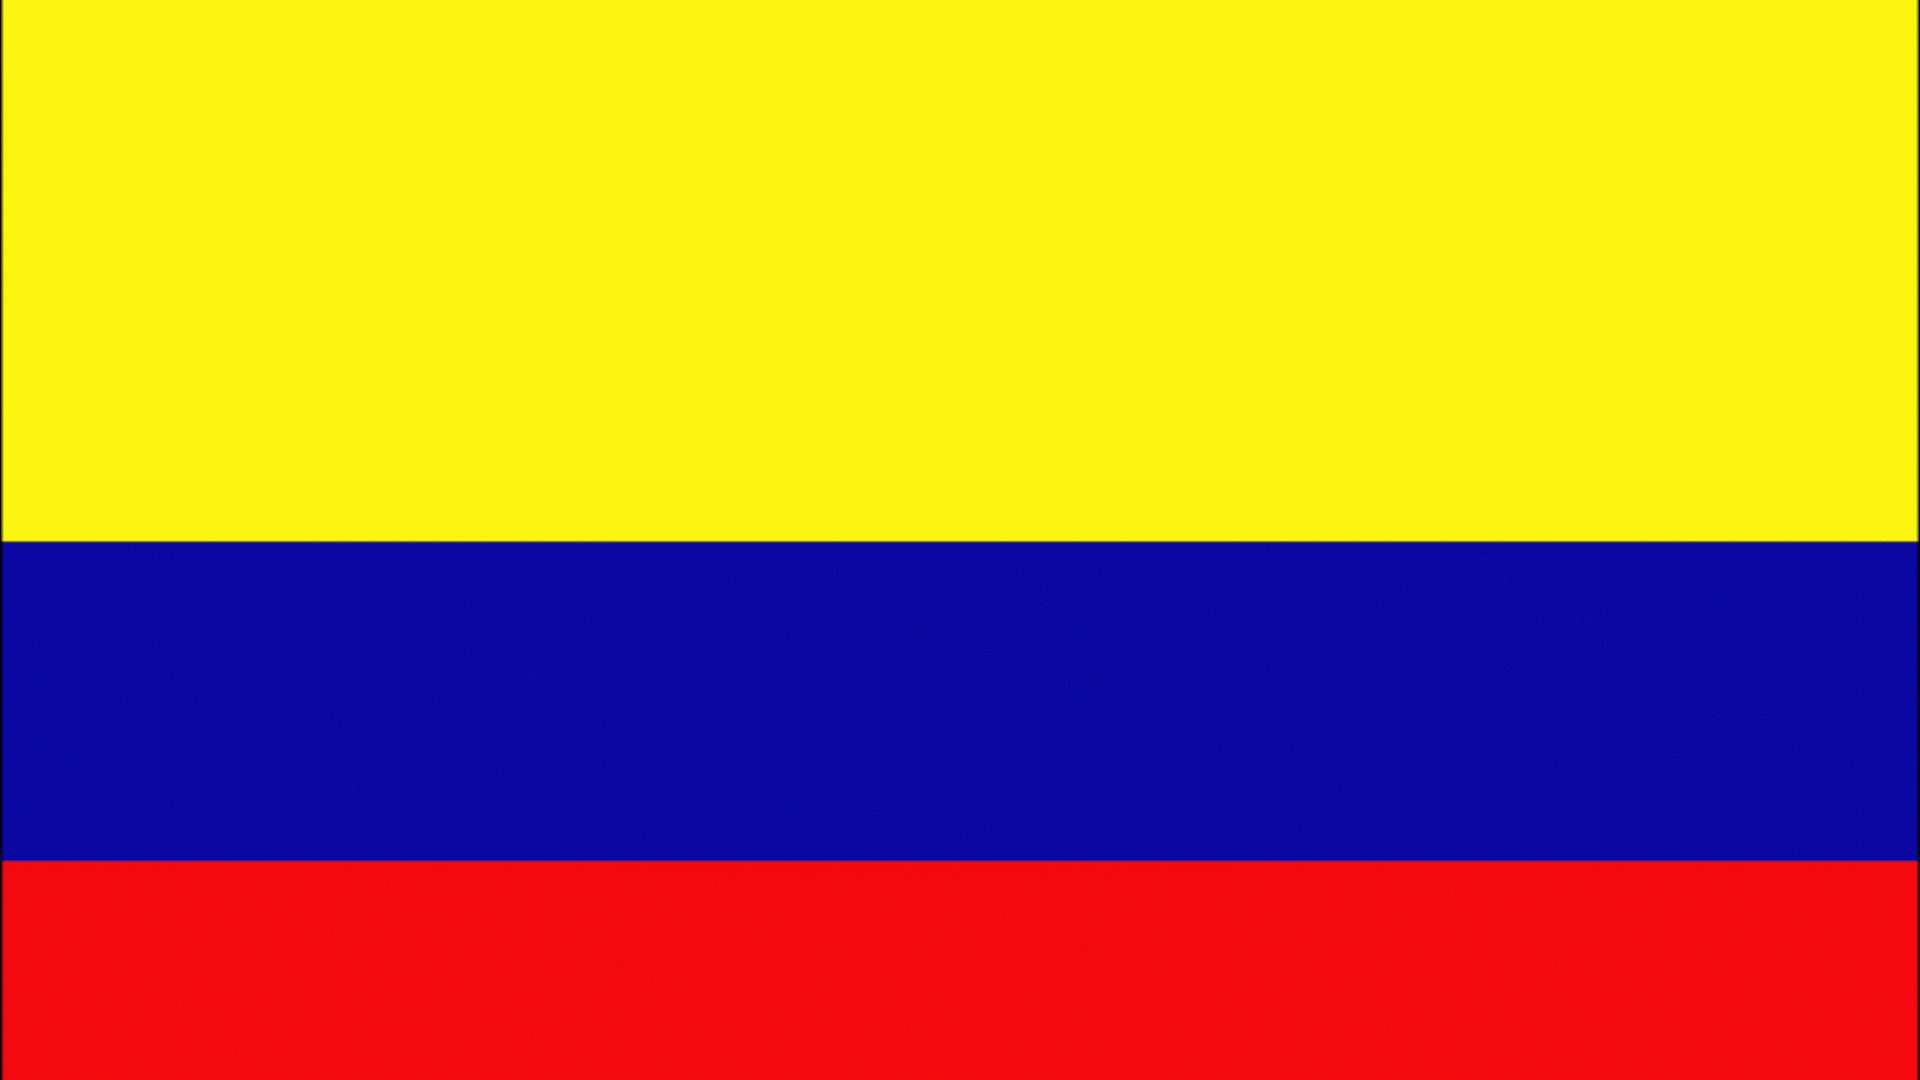 Colombia Flag, High Definition, High Quality, Widescreen